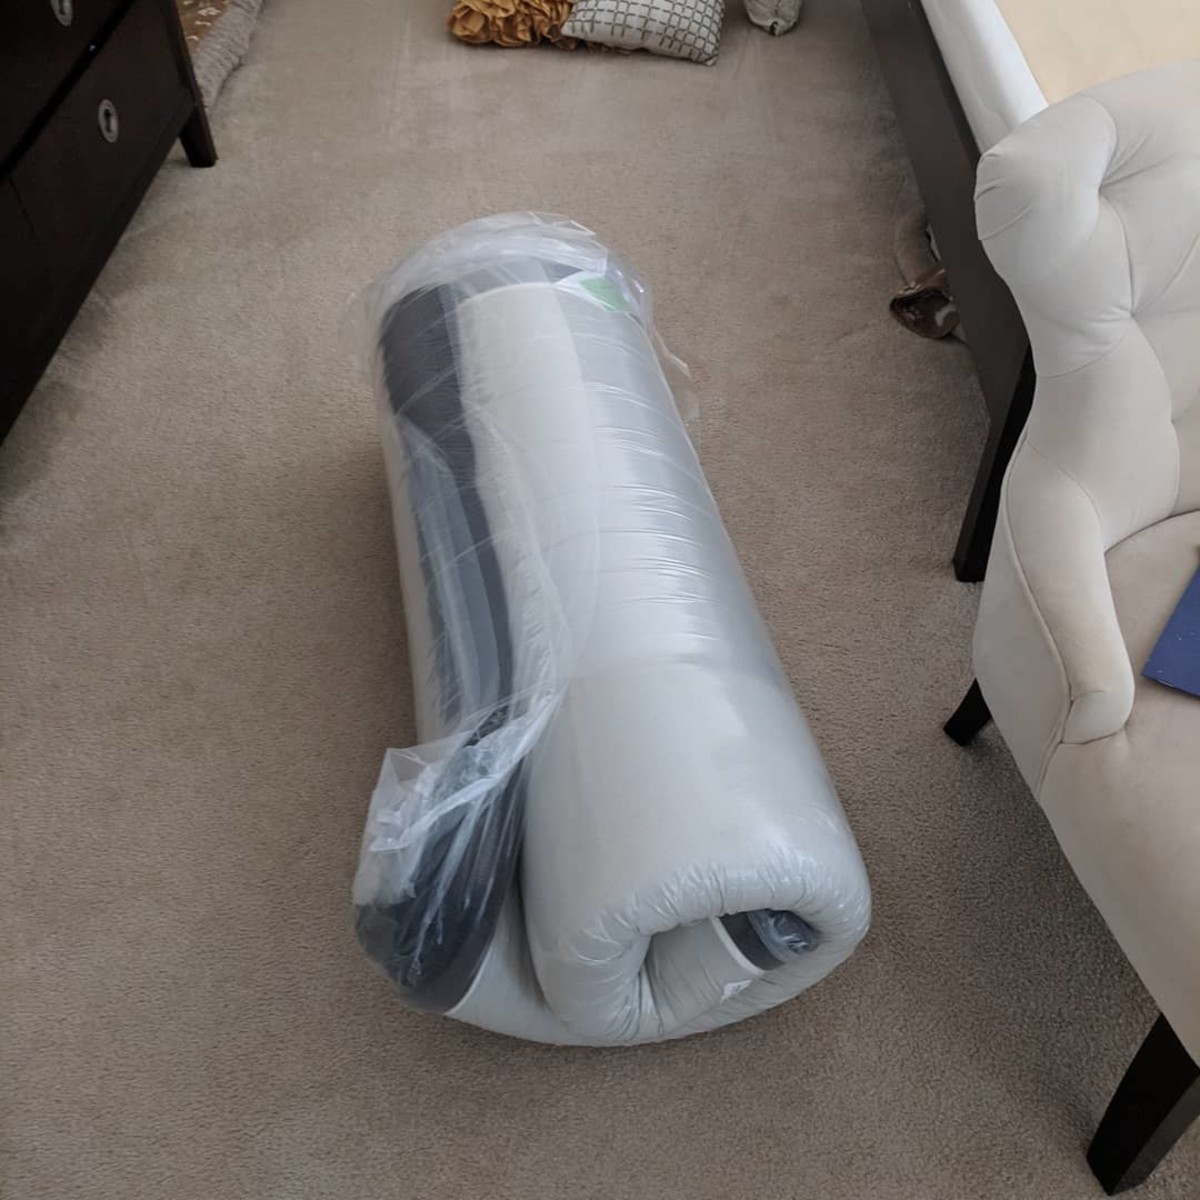 Once I pulled it out of the box I found it wrapped poster-style in protective wrap. Careful when you're tearing away at the plastic not to use a sharp object that could hurt your new mattress!